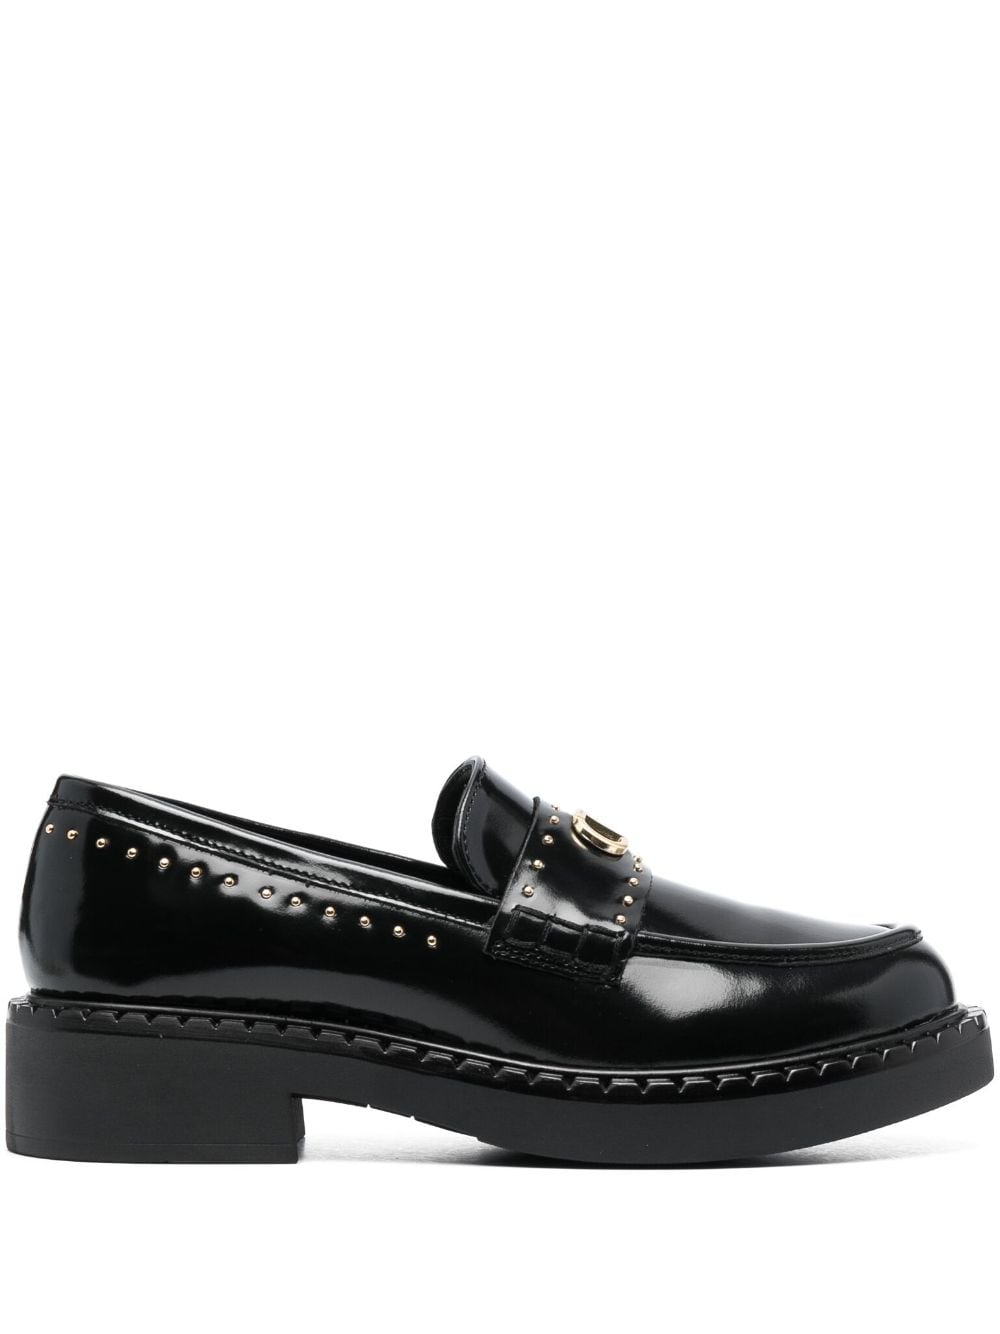 TWINSET 40mm stud-embellished leather loafers - Black von TWINSET